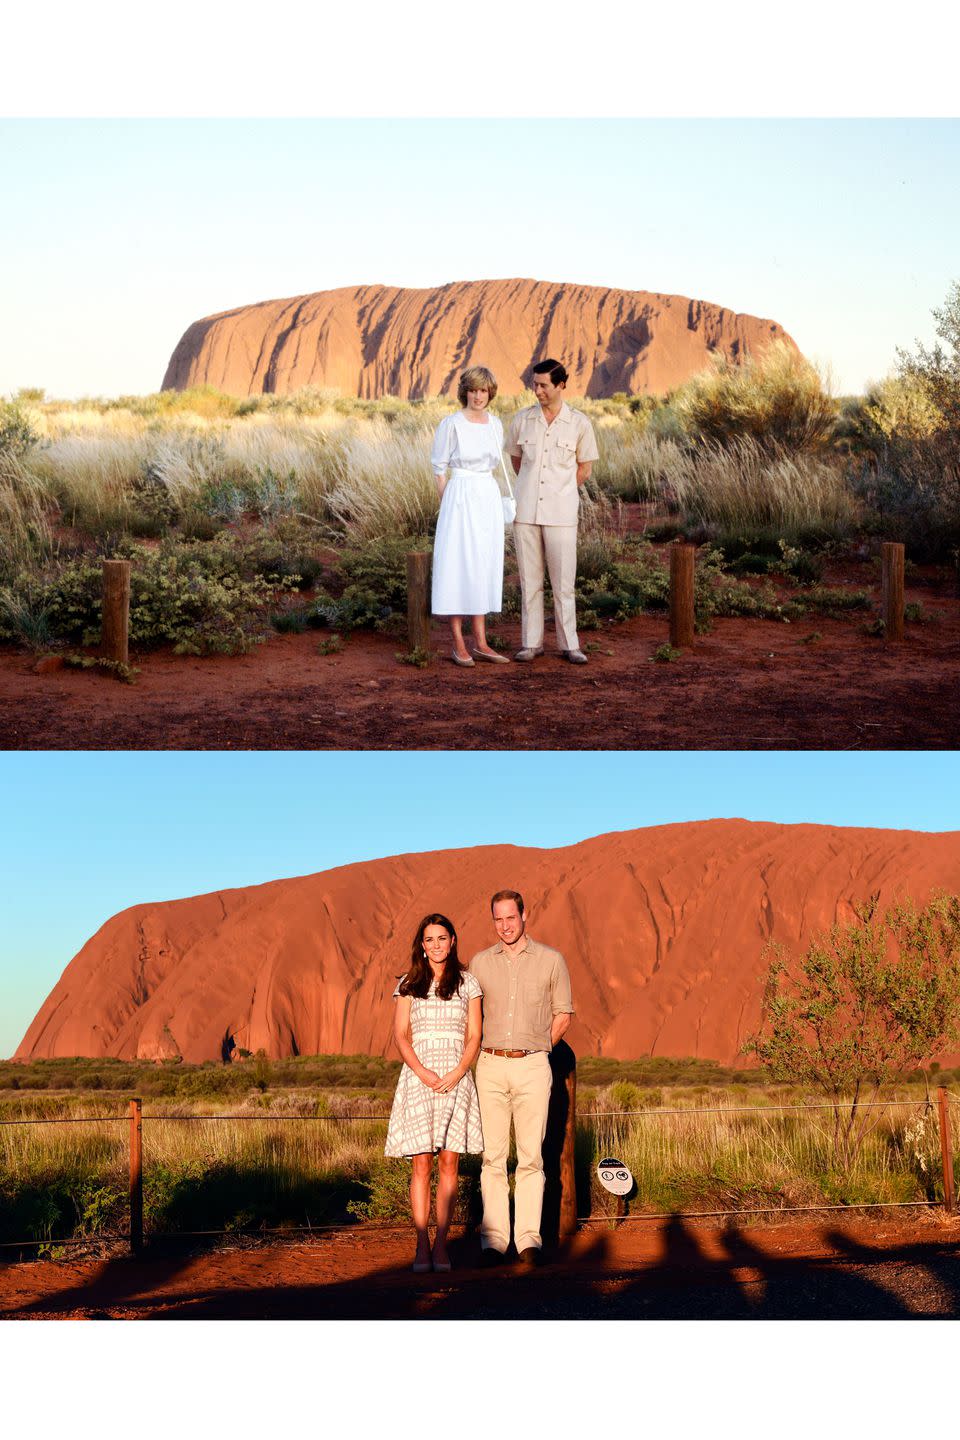 <p>Diana and Charles at Ayers Rock in Australia in 1983. Kate and William at Ayers Rock in 2014.</p>